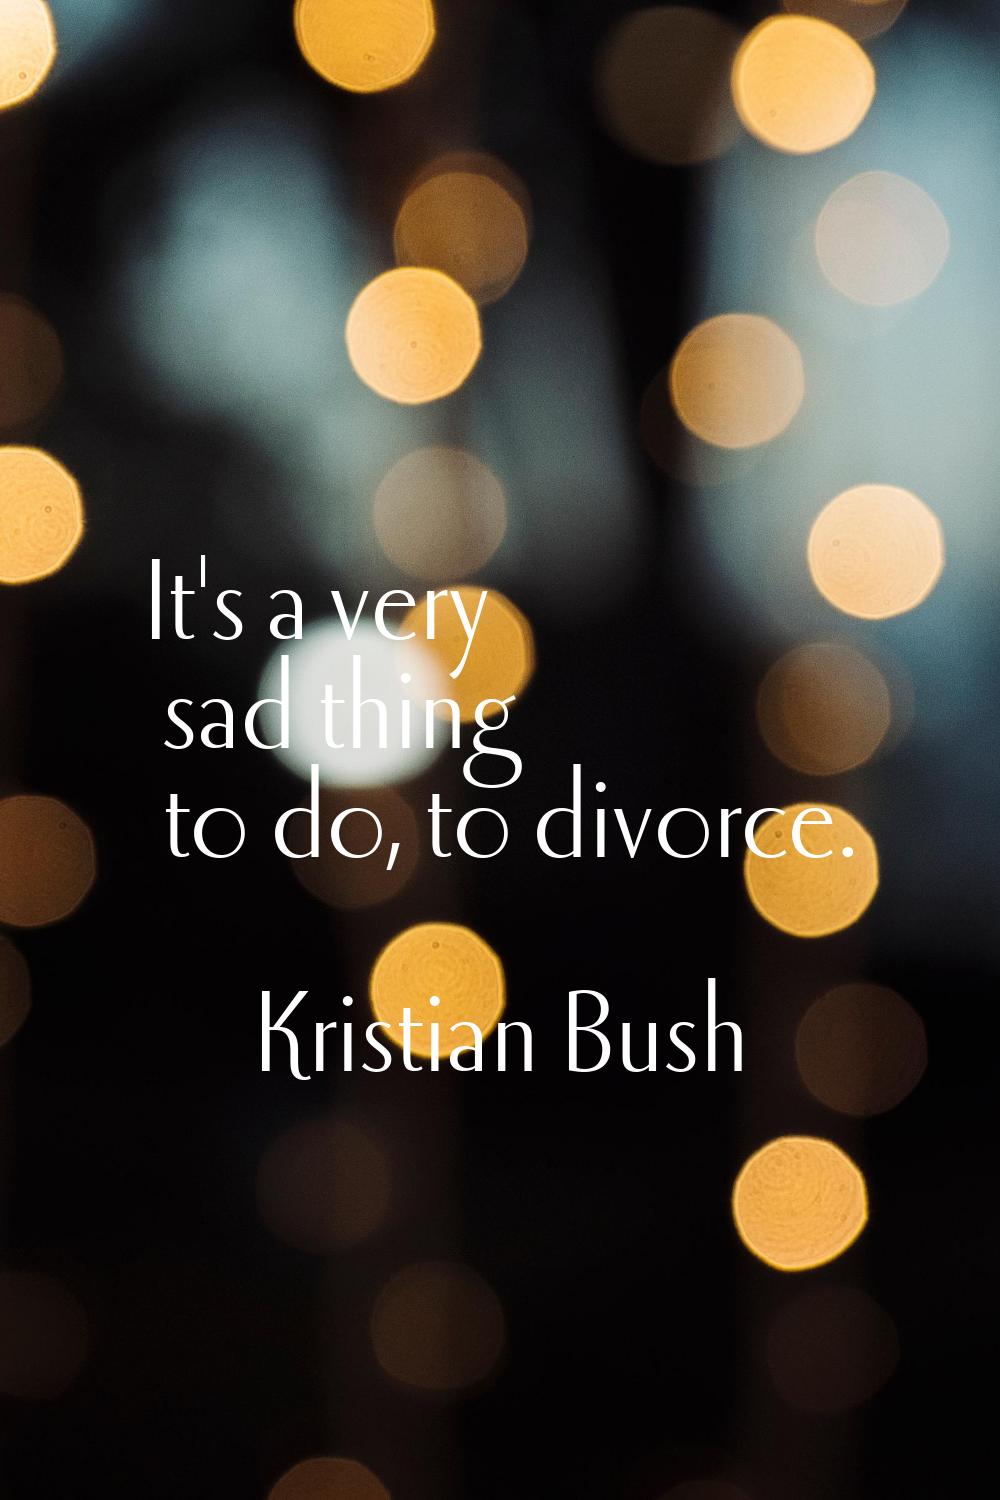 It's a very sad thing to do, to divorce.